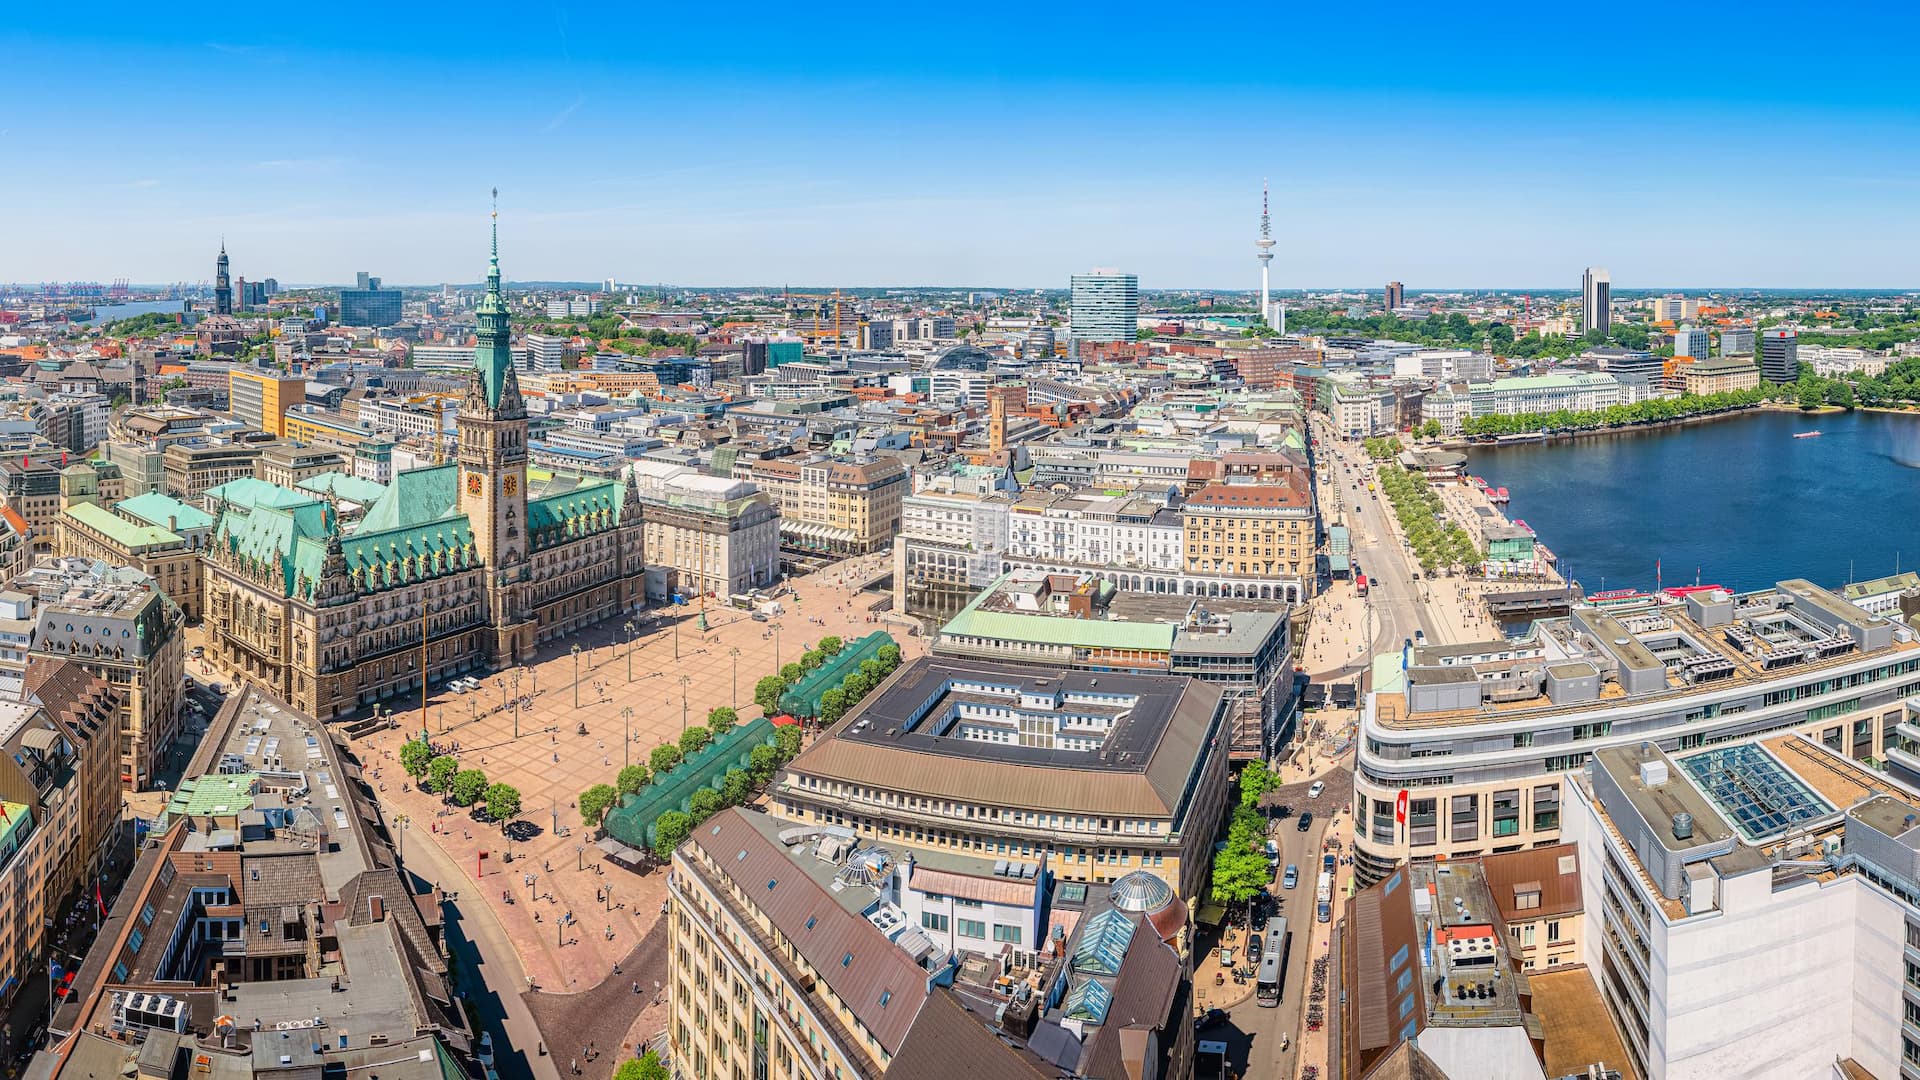 Beautiful aerial view of historic city center of hanseatic Hamburg with famous town hall at market square and ancient harbour district in the background on a sunny day with blue sky in summer, Germany; Shutterstock ID 1722098242; purchase_order: Julia Romero